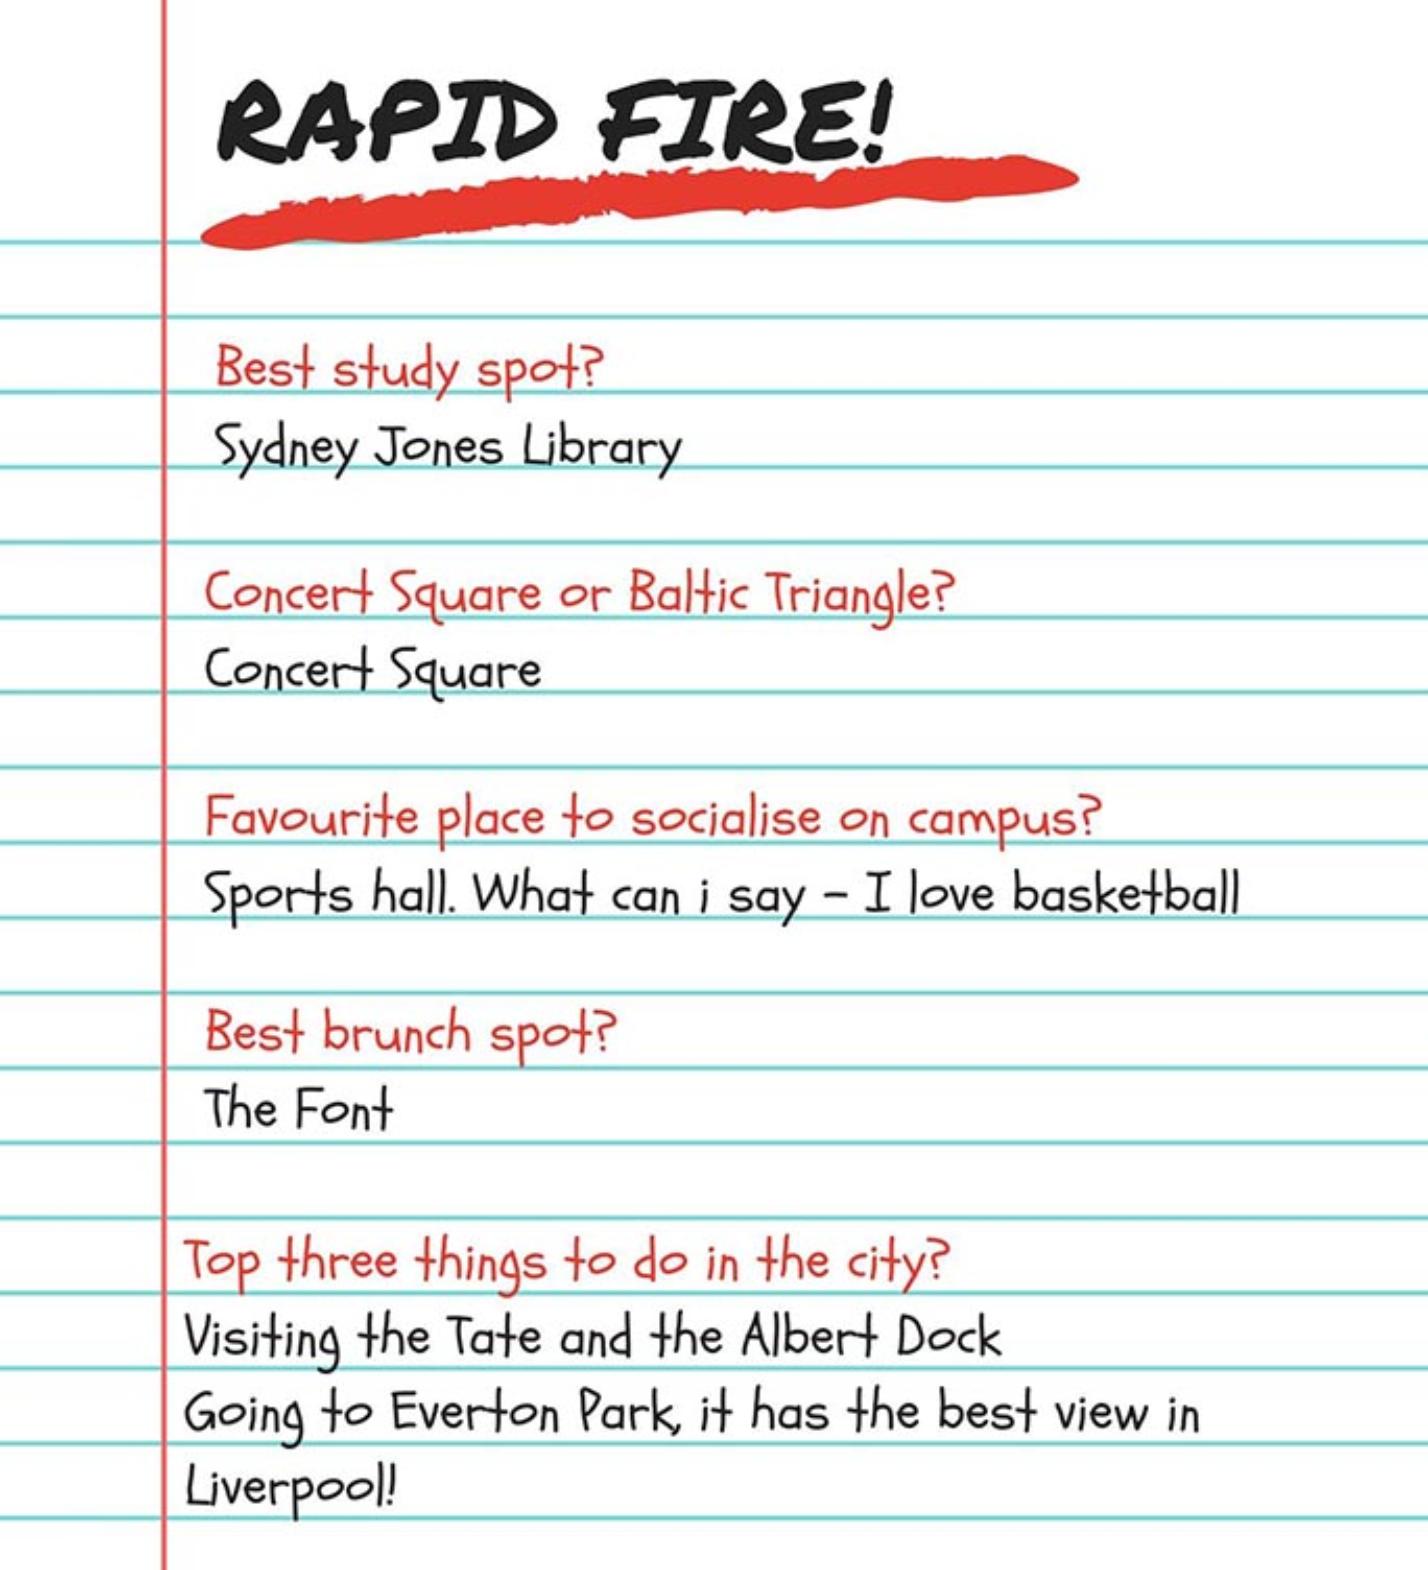 Rapid fire questions for Rebecca Taylor